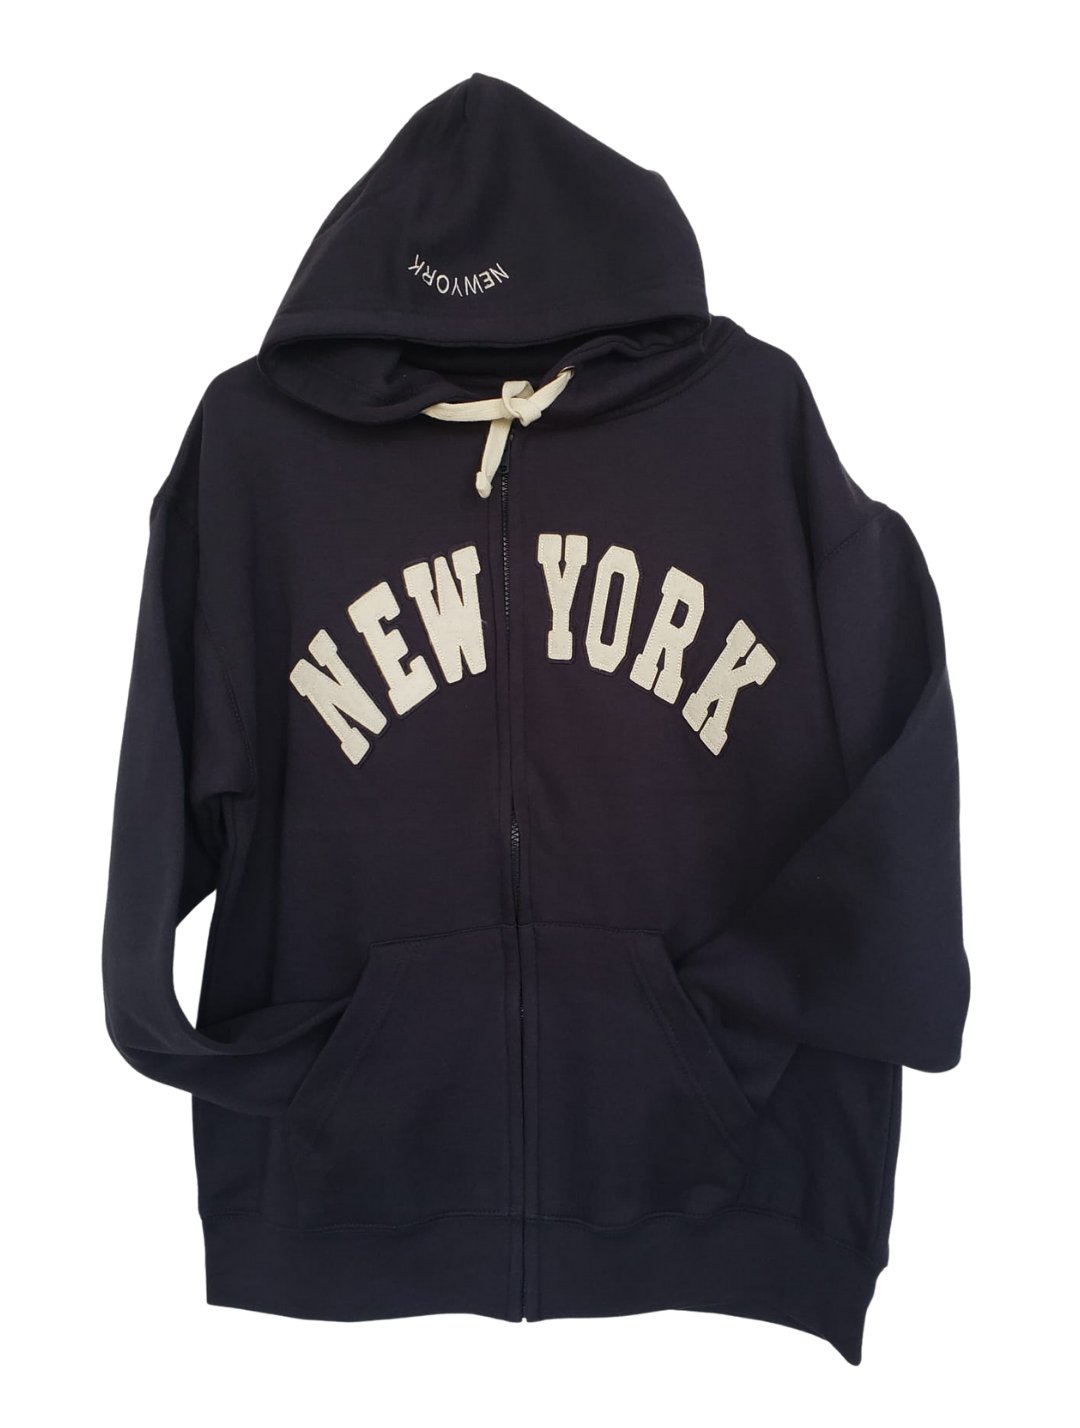 Official NYPD Hoodie Sweatshirt Small Midnight Blue New York